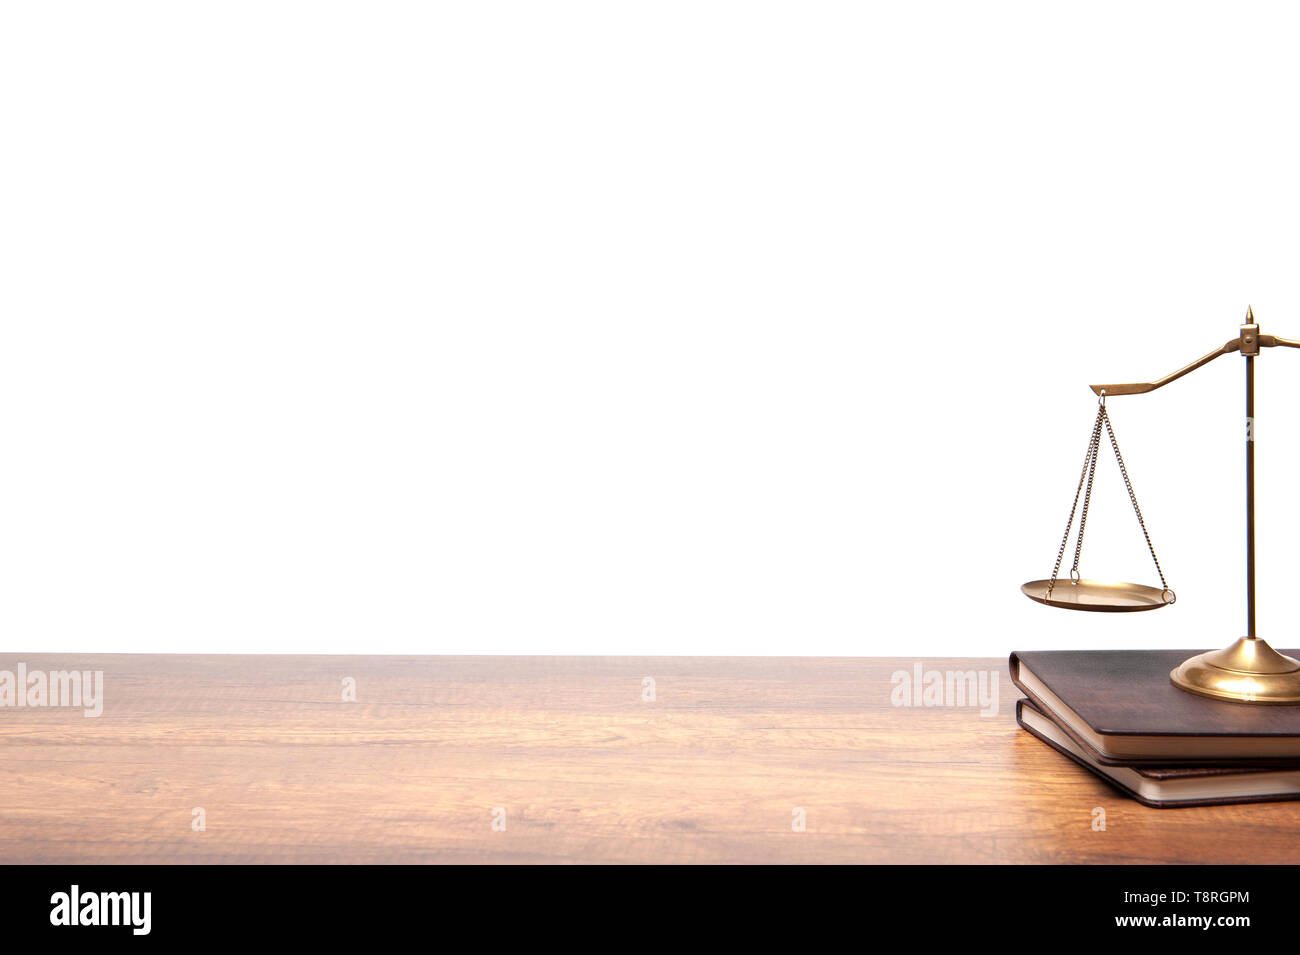 Gold brass balance scale placed on the vintage books and wood table on white background, legal law concept. Stock Photo